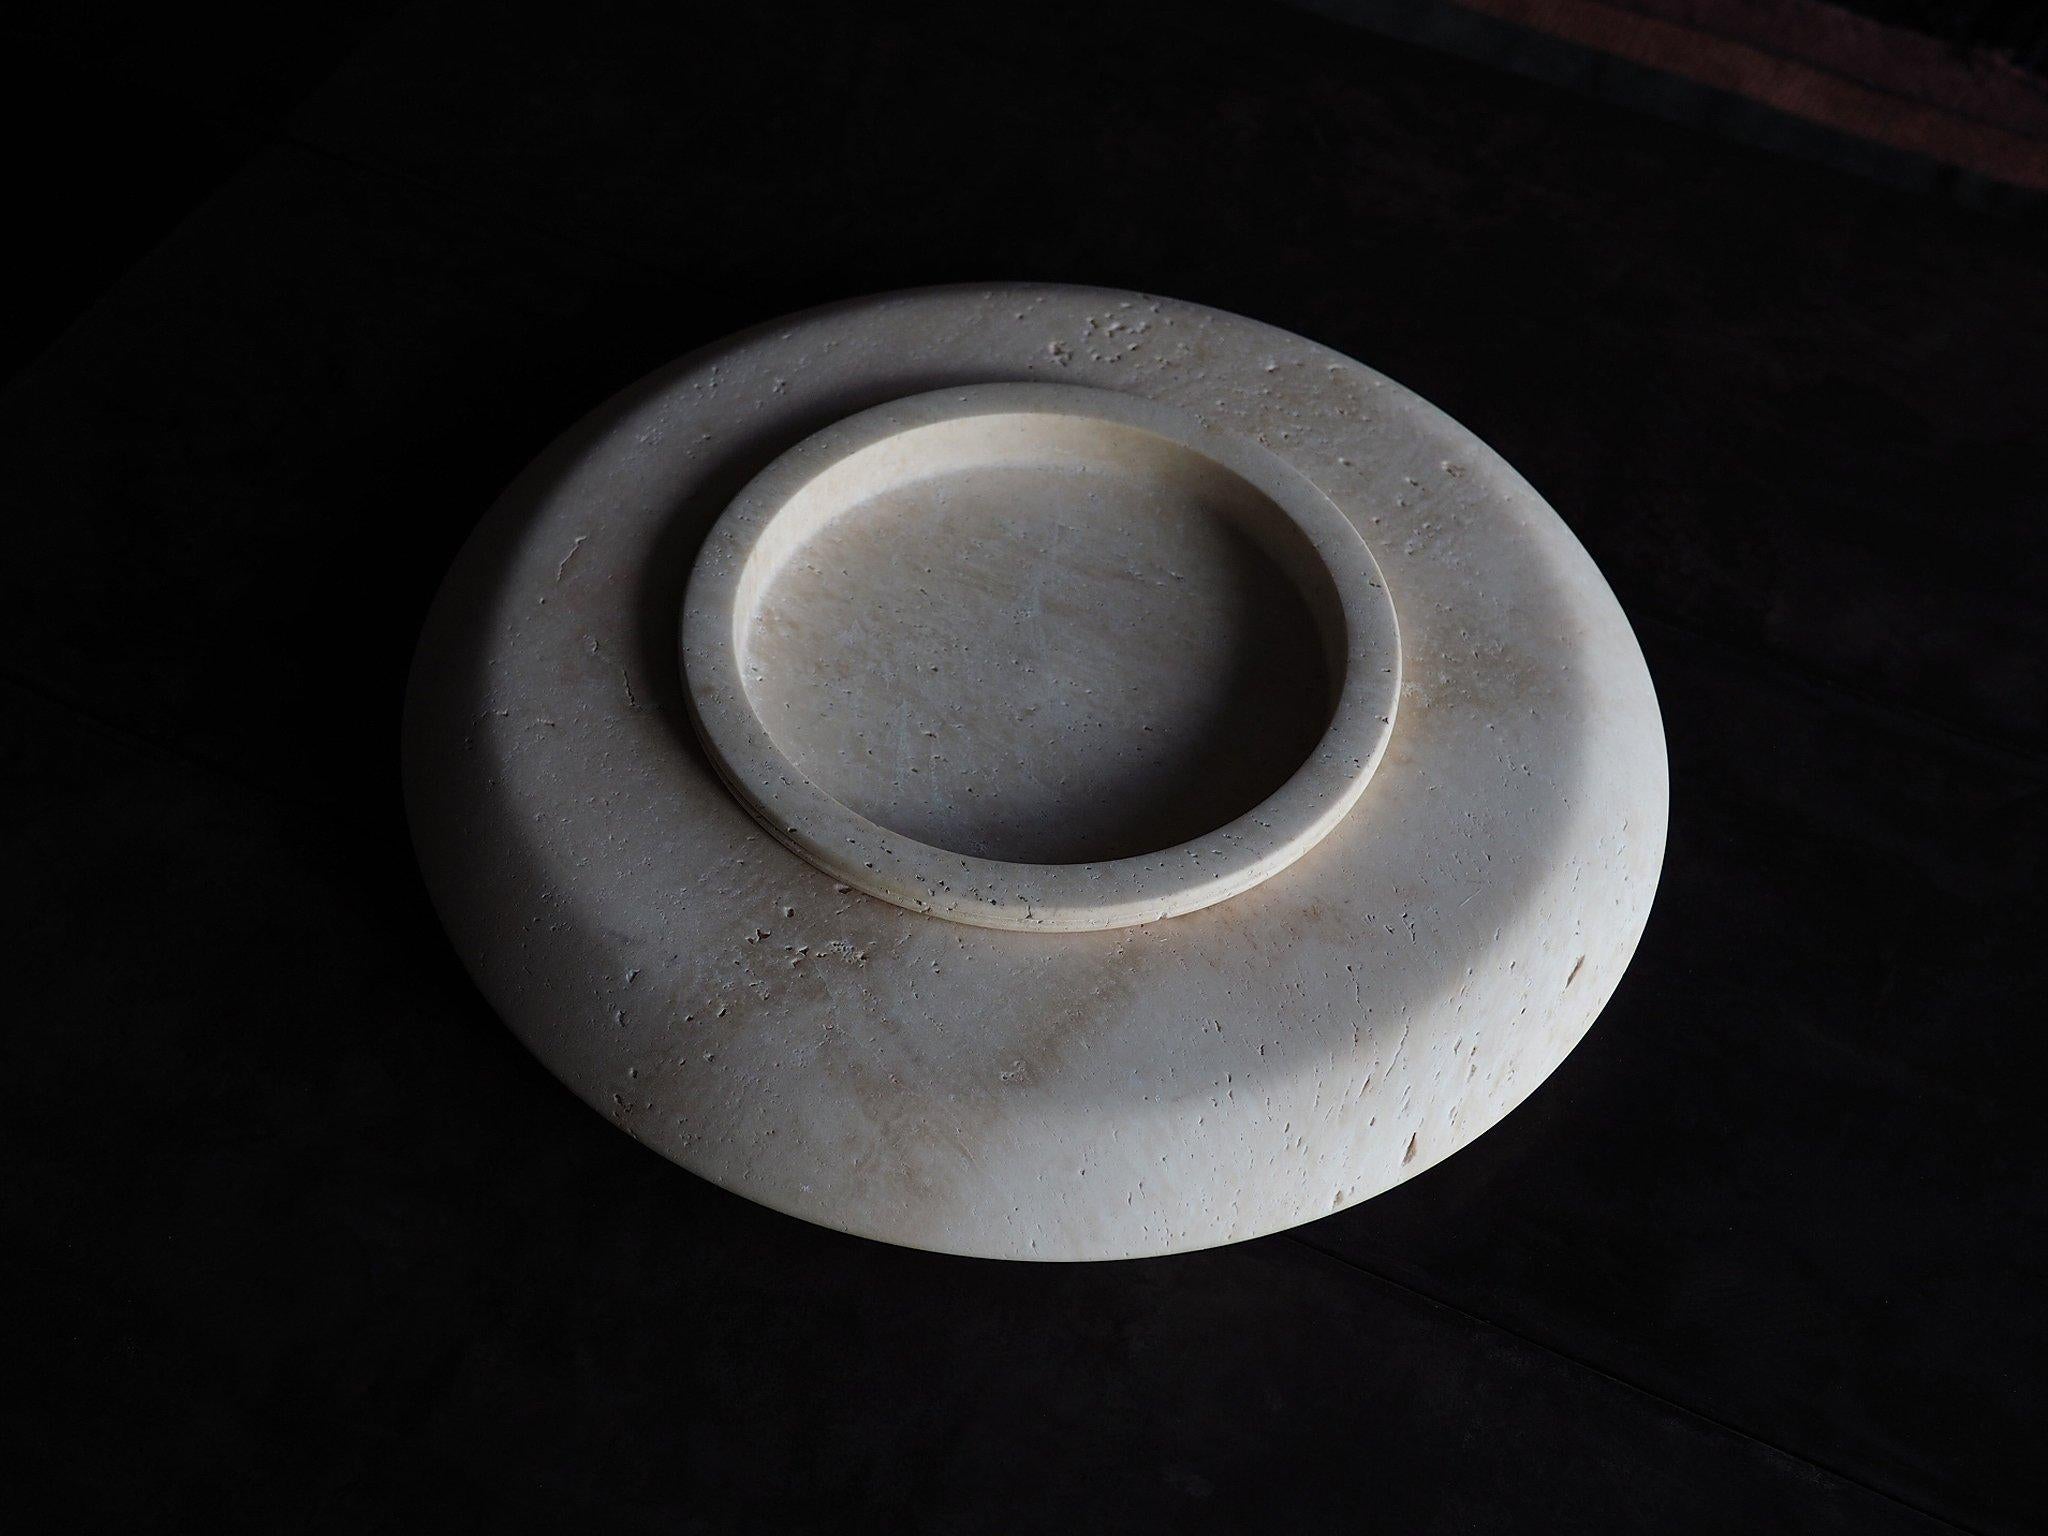 Stieglitz vessel, a natural stone heirloom in unfilled travertine. A low-slung sculptural form of two components, vessel & bowl. The finish is left unfilled, celebrating the beauty & porosity of the natural stone. The most desirable pieces expose